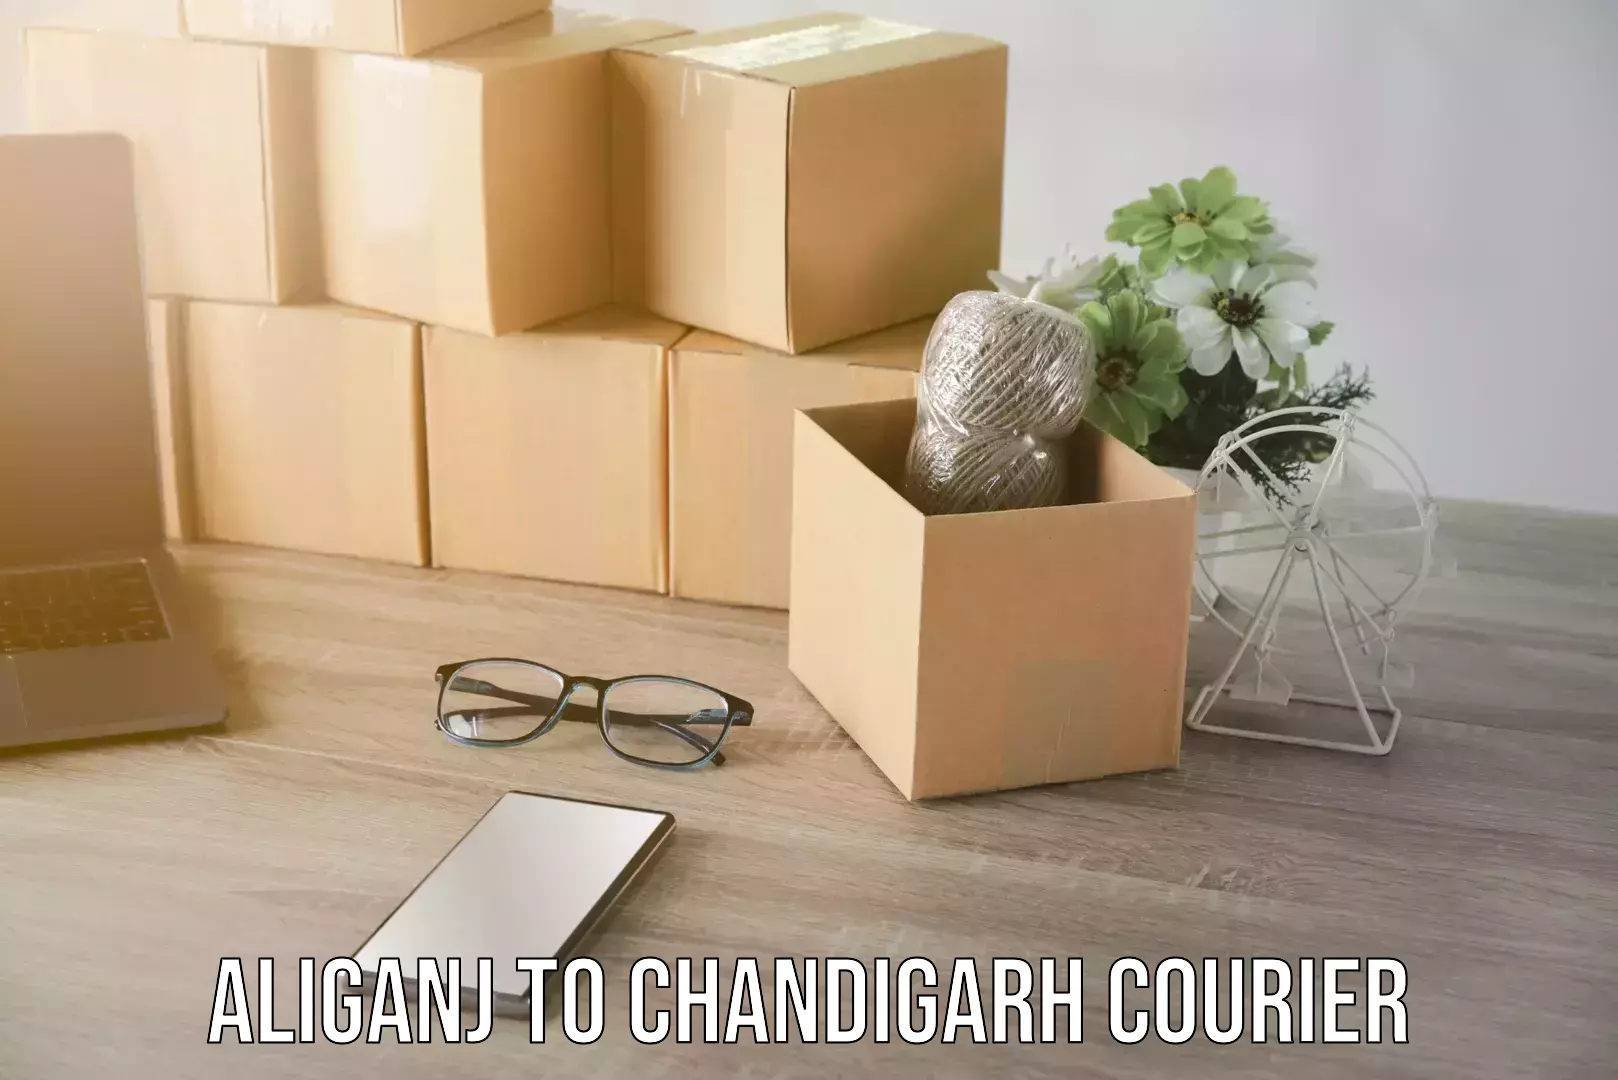 Delivery service partnership Aliganj to Chandigarh